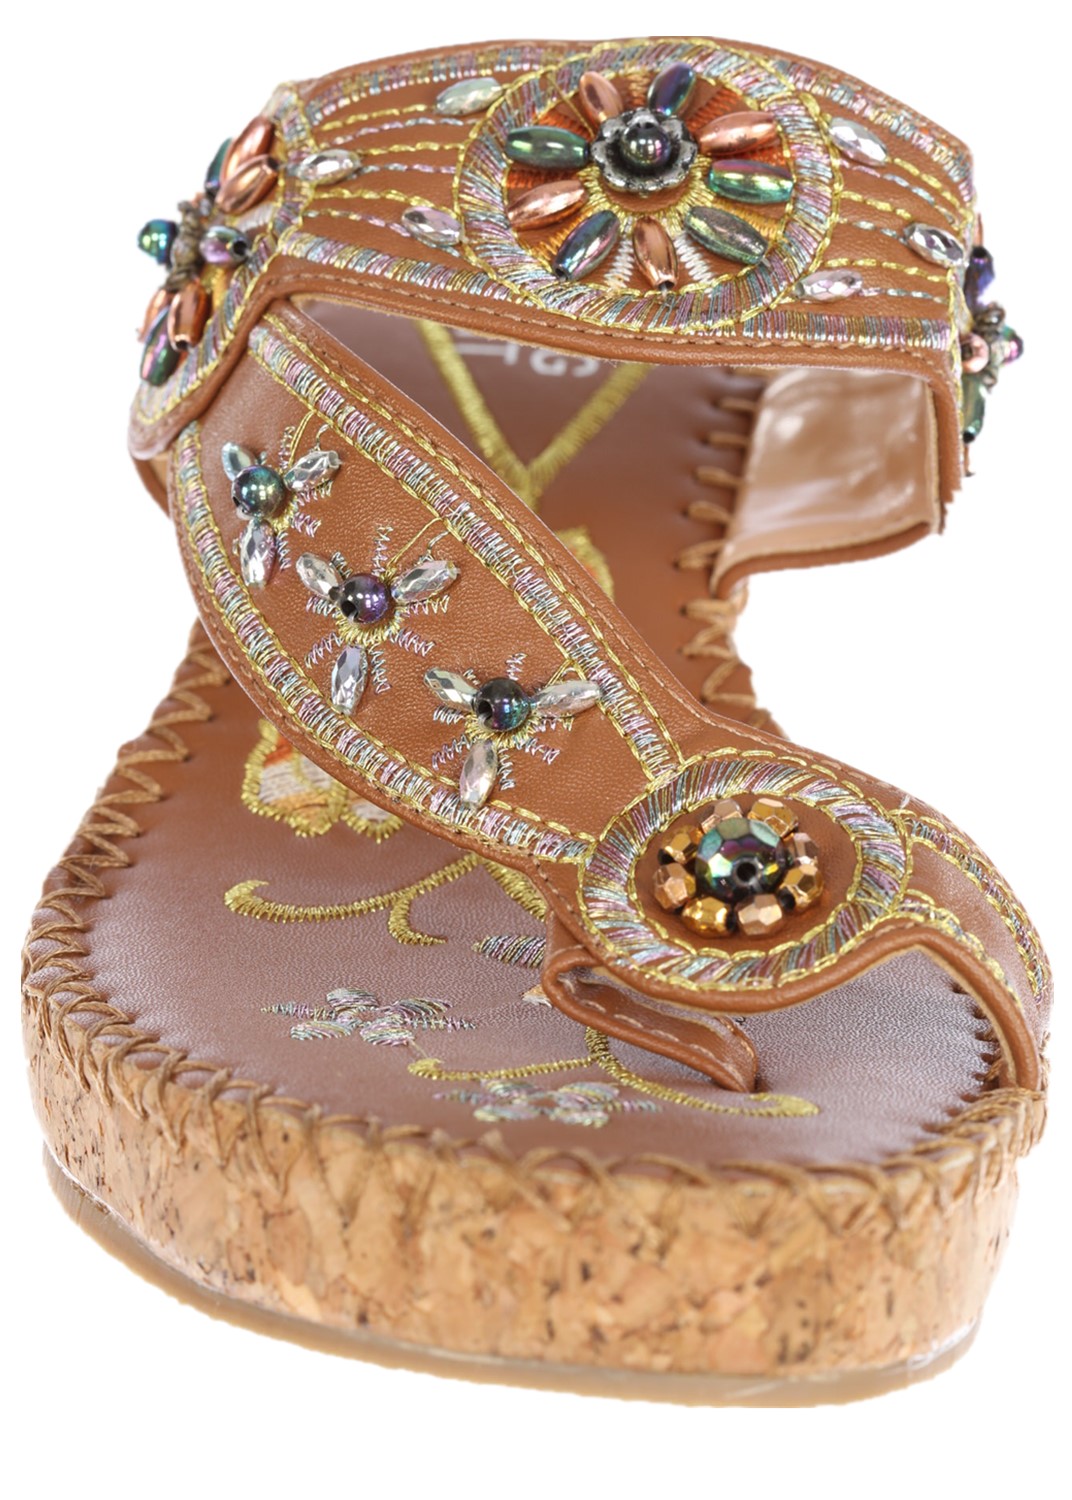 Women's Casual Embroided Beaded Wedge Sandals-Brown-6 - image 2 of 3